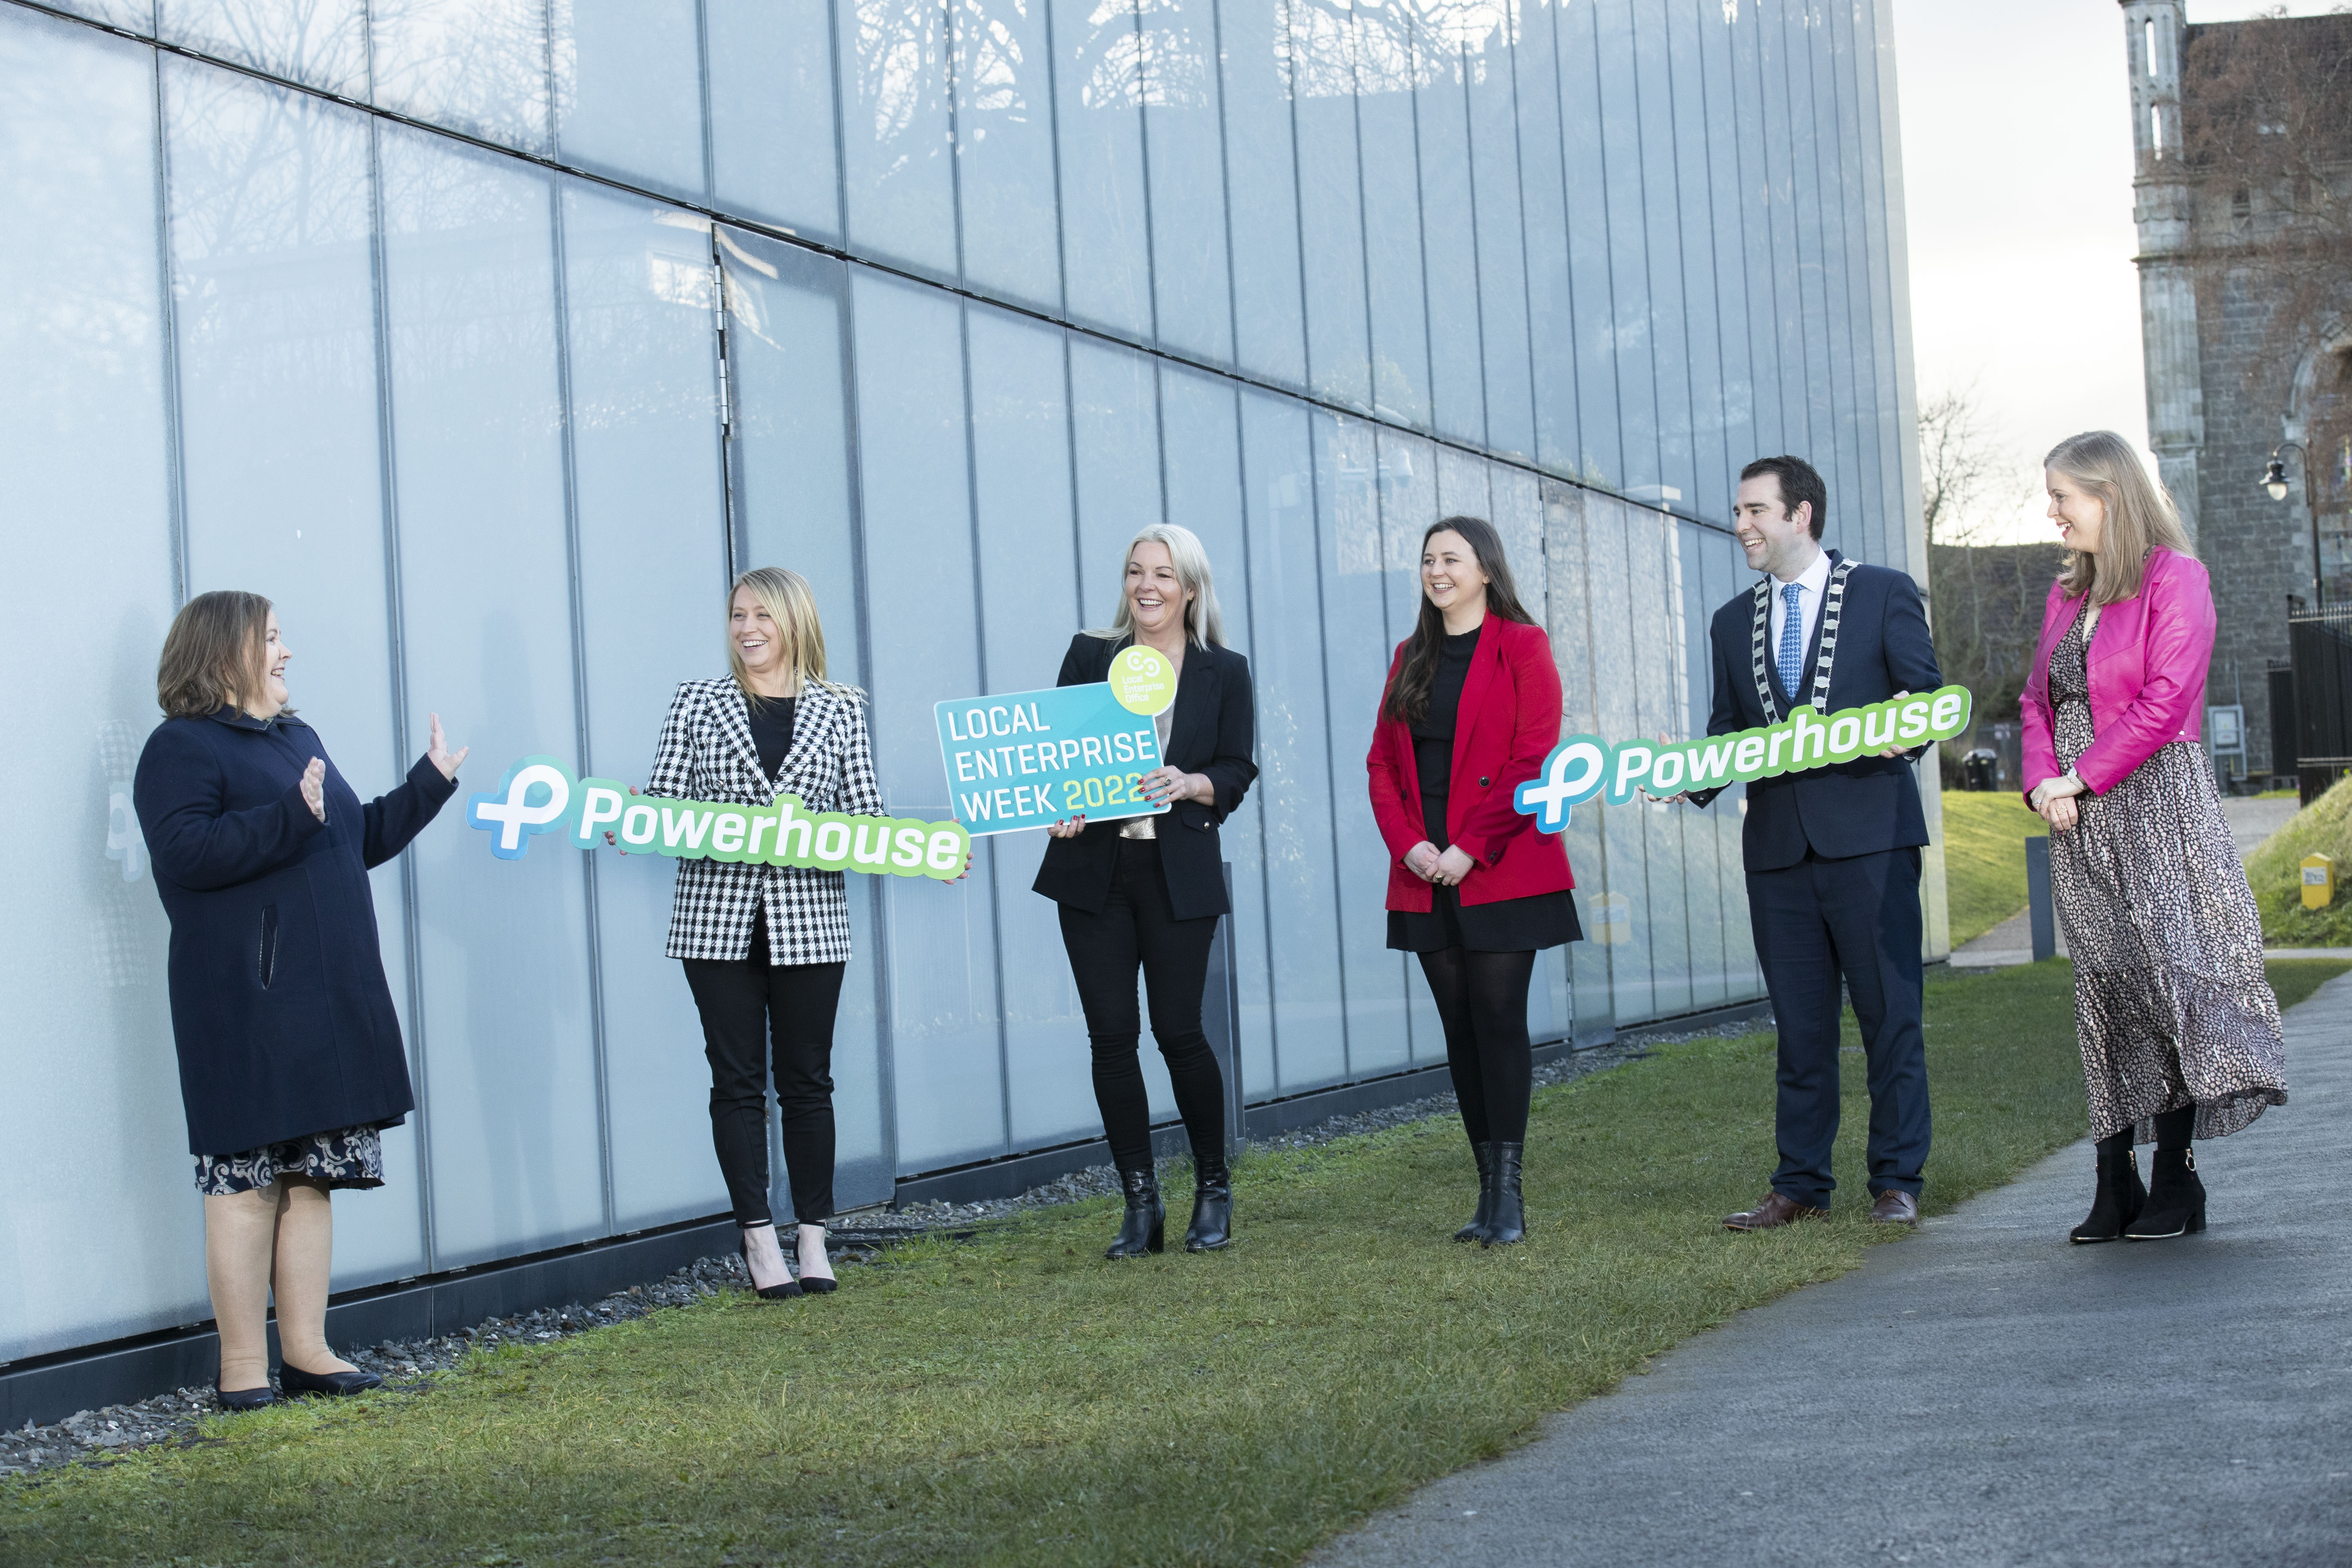 ‘Powerhouse’ presents positive plans for female businesswomen in County Carlow. 